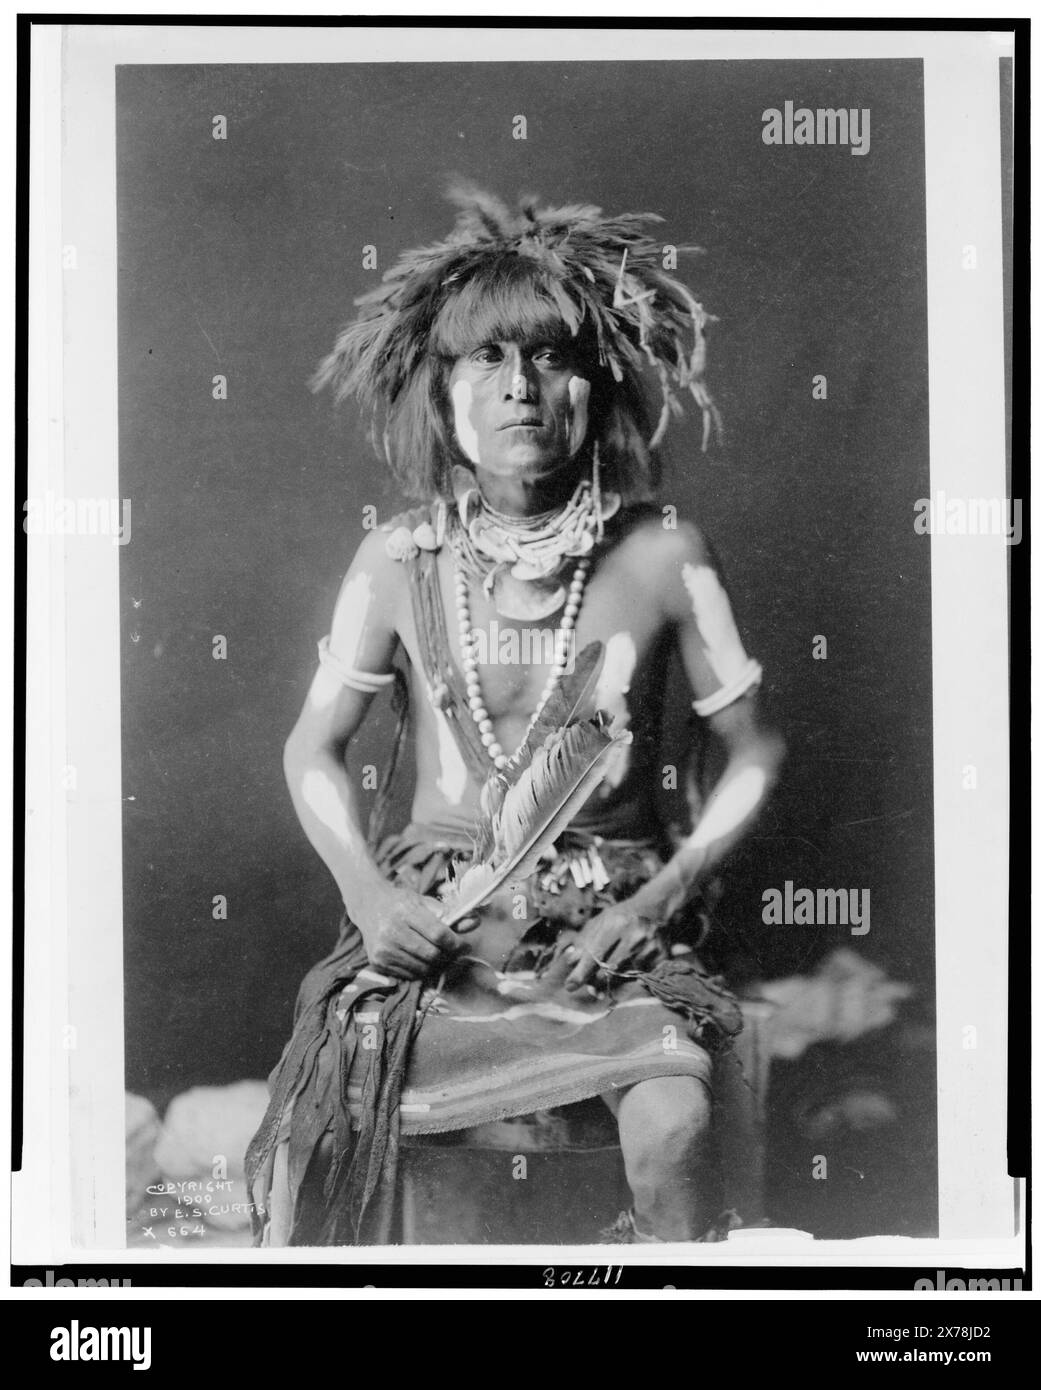 Honovi-Walpi snake priest, with Totkya Day painting, Edward S. Curtis Collection ., Curtis no. 664., Published in: The North American Indian / Edward S. Curtis. [Seattle, Wash.] : Edward S. Curtis, 1907-30, Suppl. v. 12, pl. 408.. Indians of North America, Clothing & dress, 1910. , Hopi Indians, Clothing & dress, 1910. Stock Photo